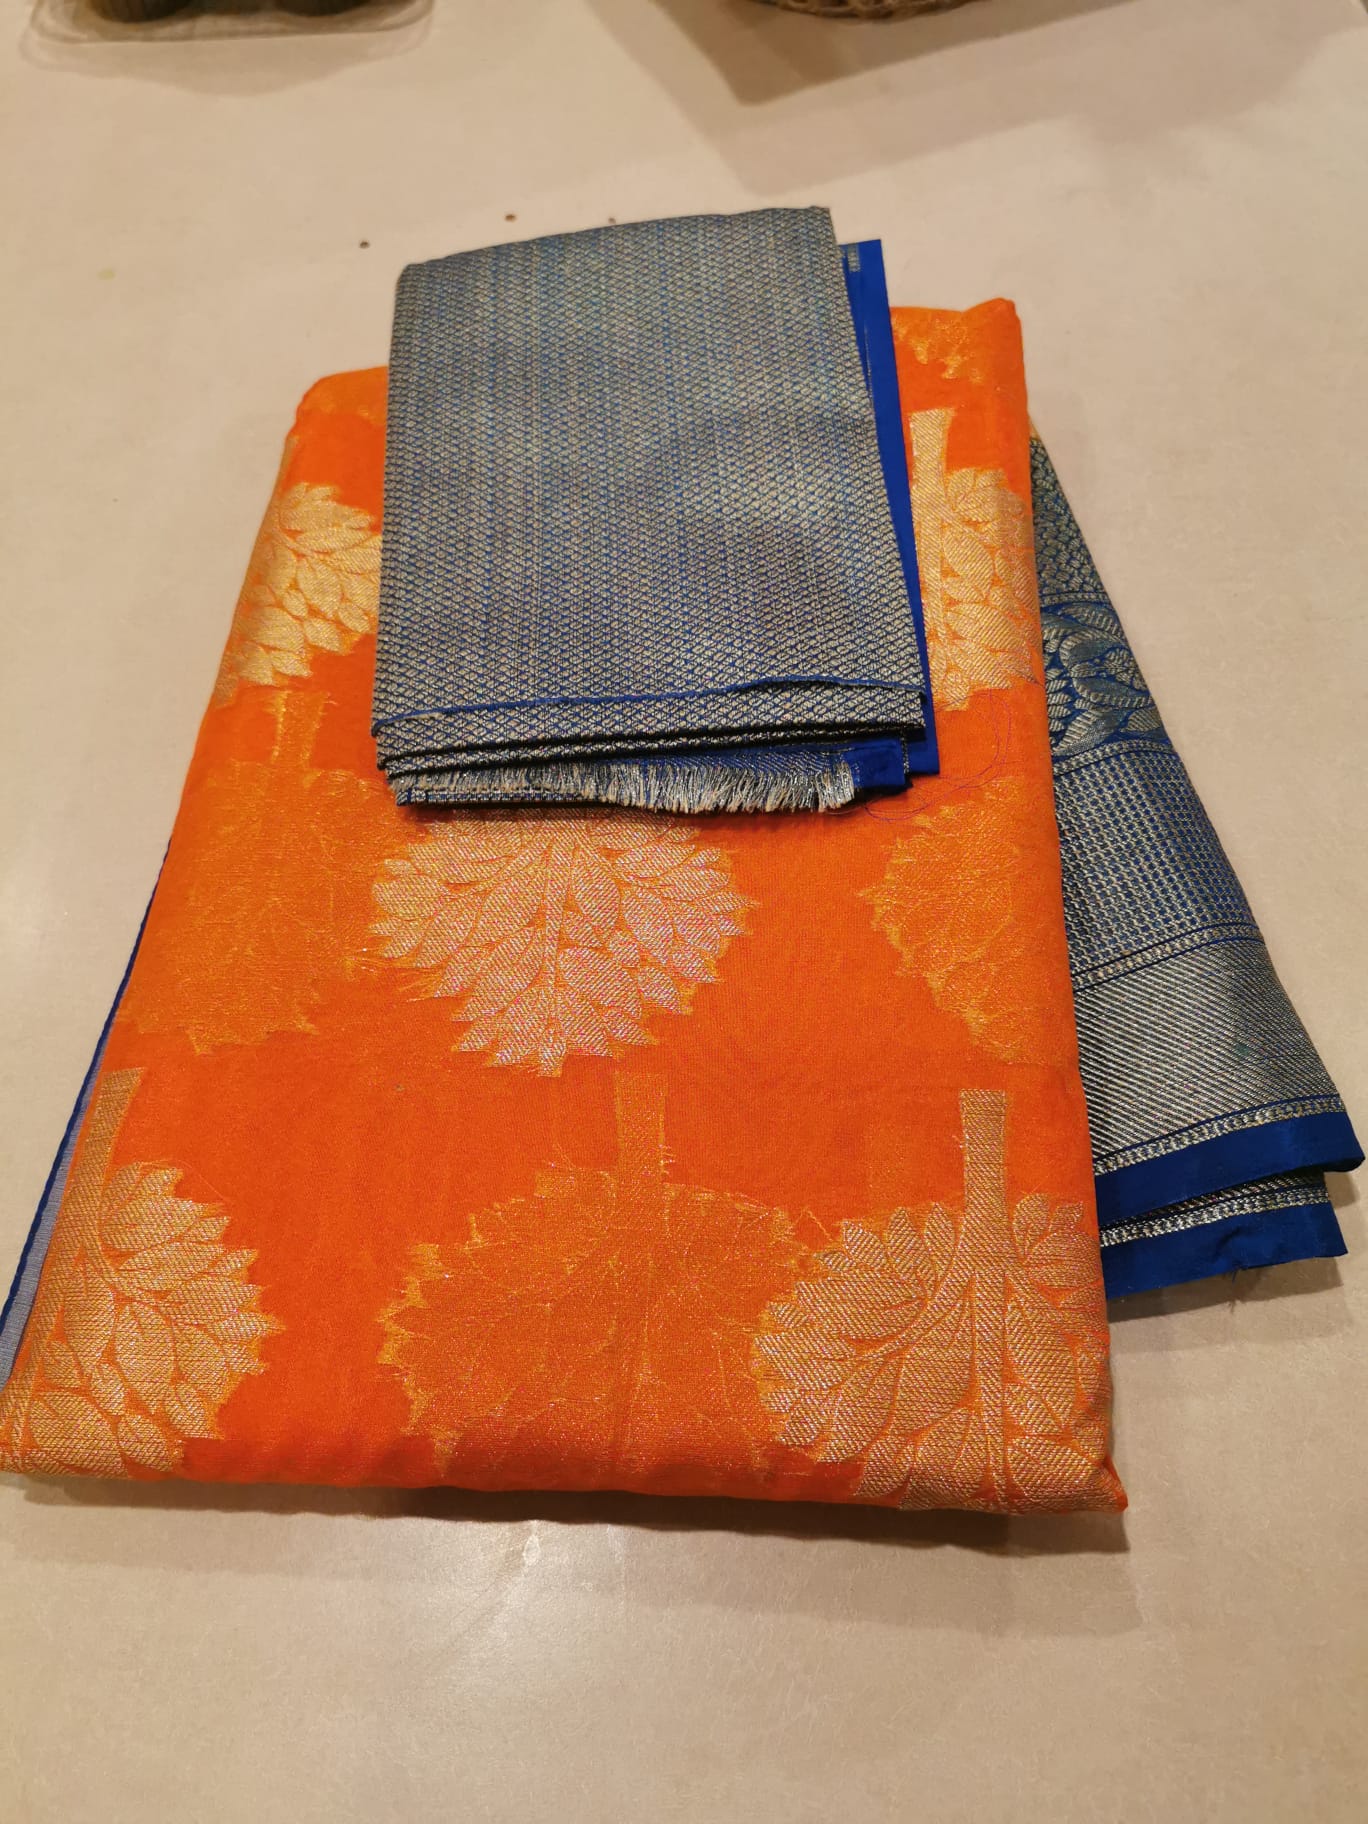 Fine Organza Tissue Saree - Indian Clothing in Denver, CO, Aurora, CO, Boulder, CO, Fort Collins, CO, Colorado Springs, CO, Parker, CO, Highlands Ranch, CO, Cherry Creek, CO, Centennial, CO, and Longmont, CO. Nationwide shipping USA - India Fashion X